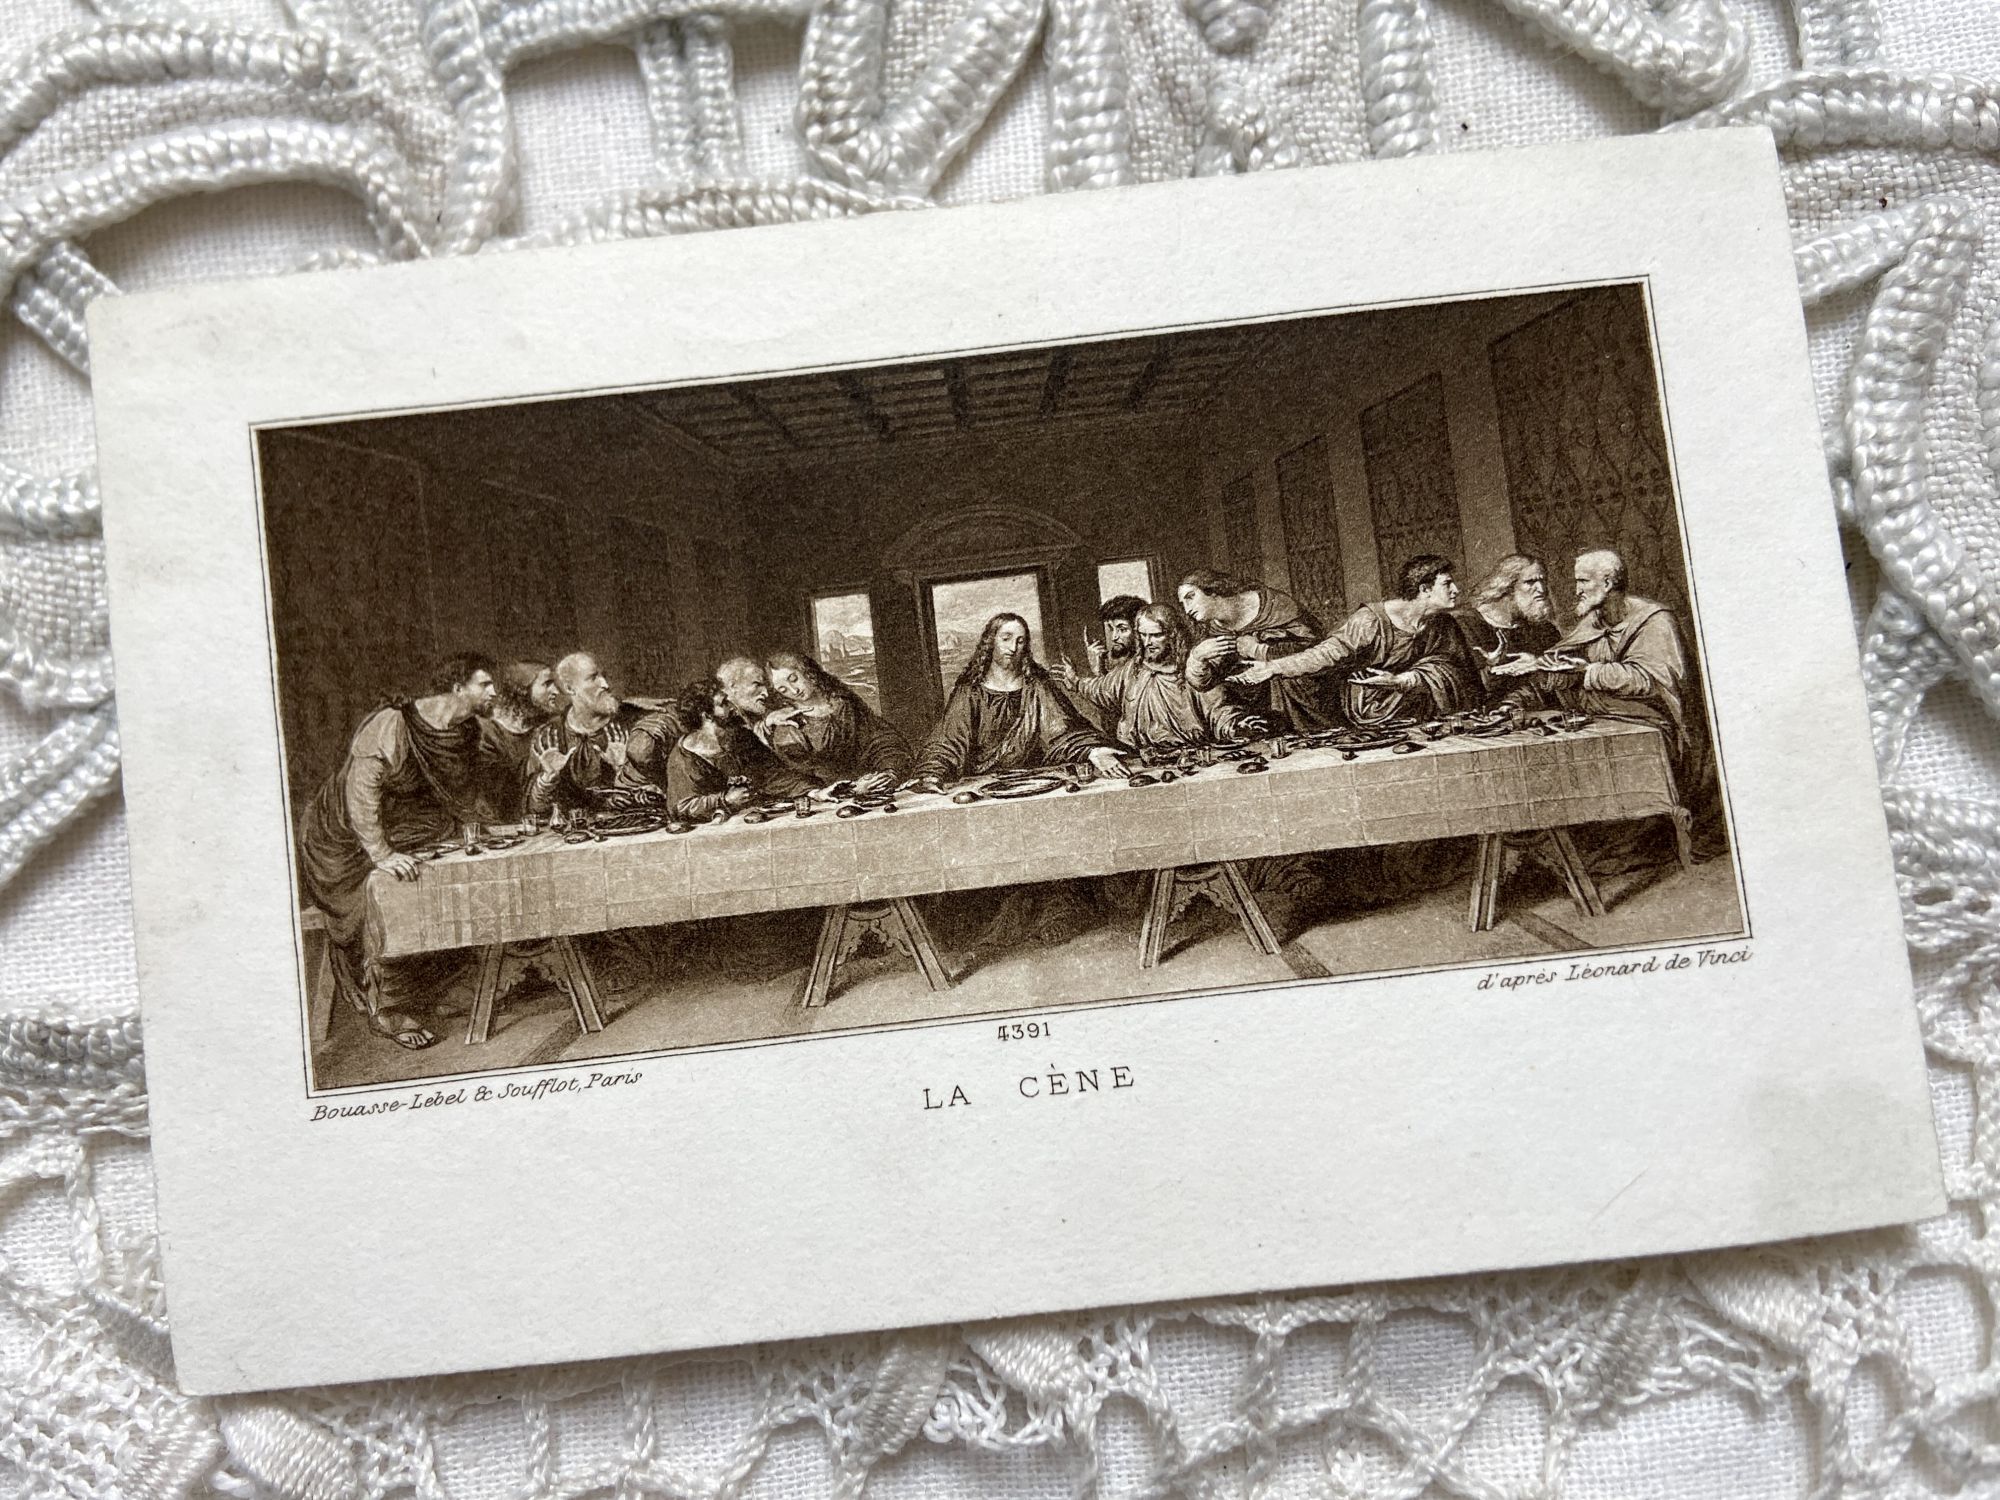 French religious image by Bouasse-Lebel & Soufflot representing the Last Supper by Leonard de Vinci